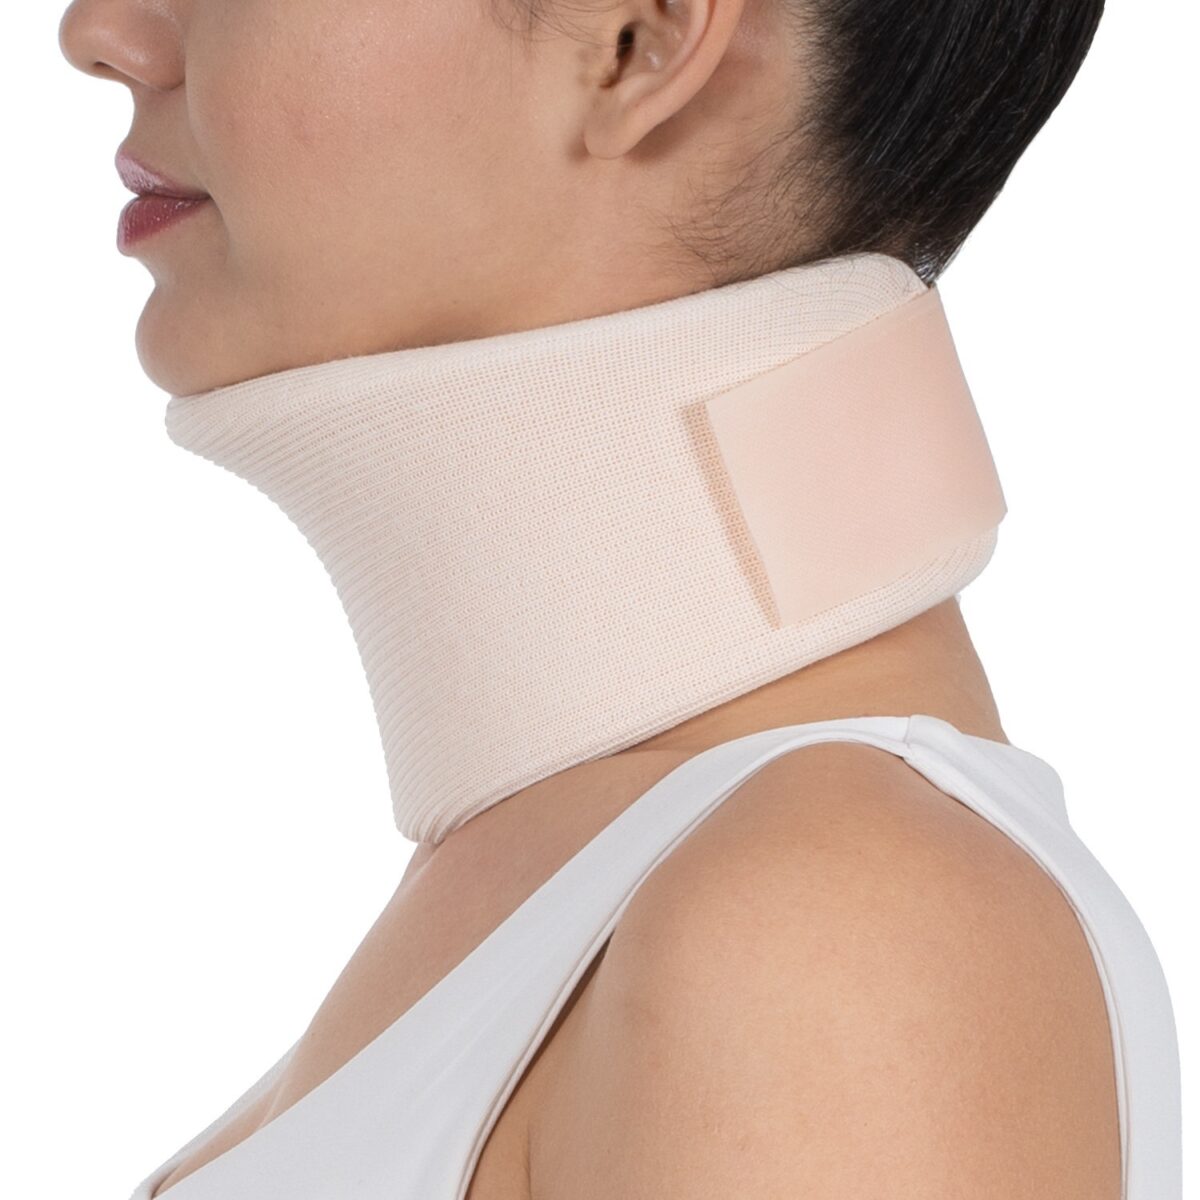 wingmed orthopedic equipments W104 nelson collar fabric coated product 4 1